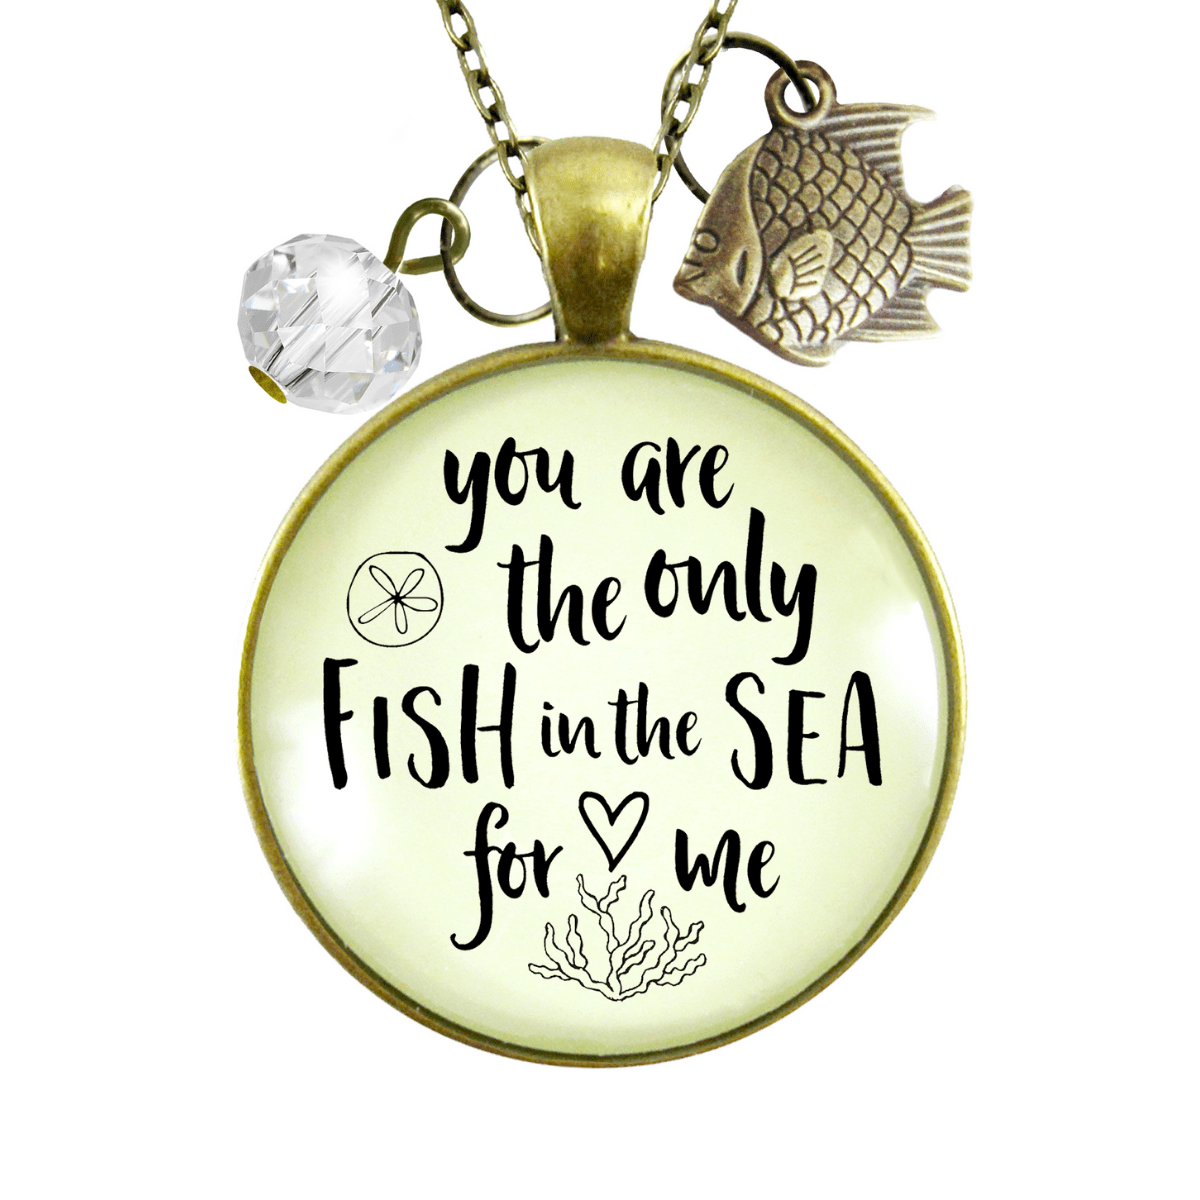 Gutsy Goodness Romantic Beach Necklace You are Only Fish in Sea Love Quote Turtle - Gutsy Goodness Handmade Jewelry;Romantic Beach Necklace You Are Only Fish In Sea Love Quote Turtle - Gutsy Goodness Handmade Jewelry Gifts